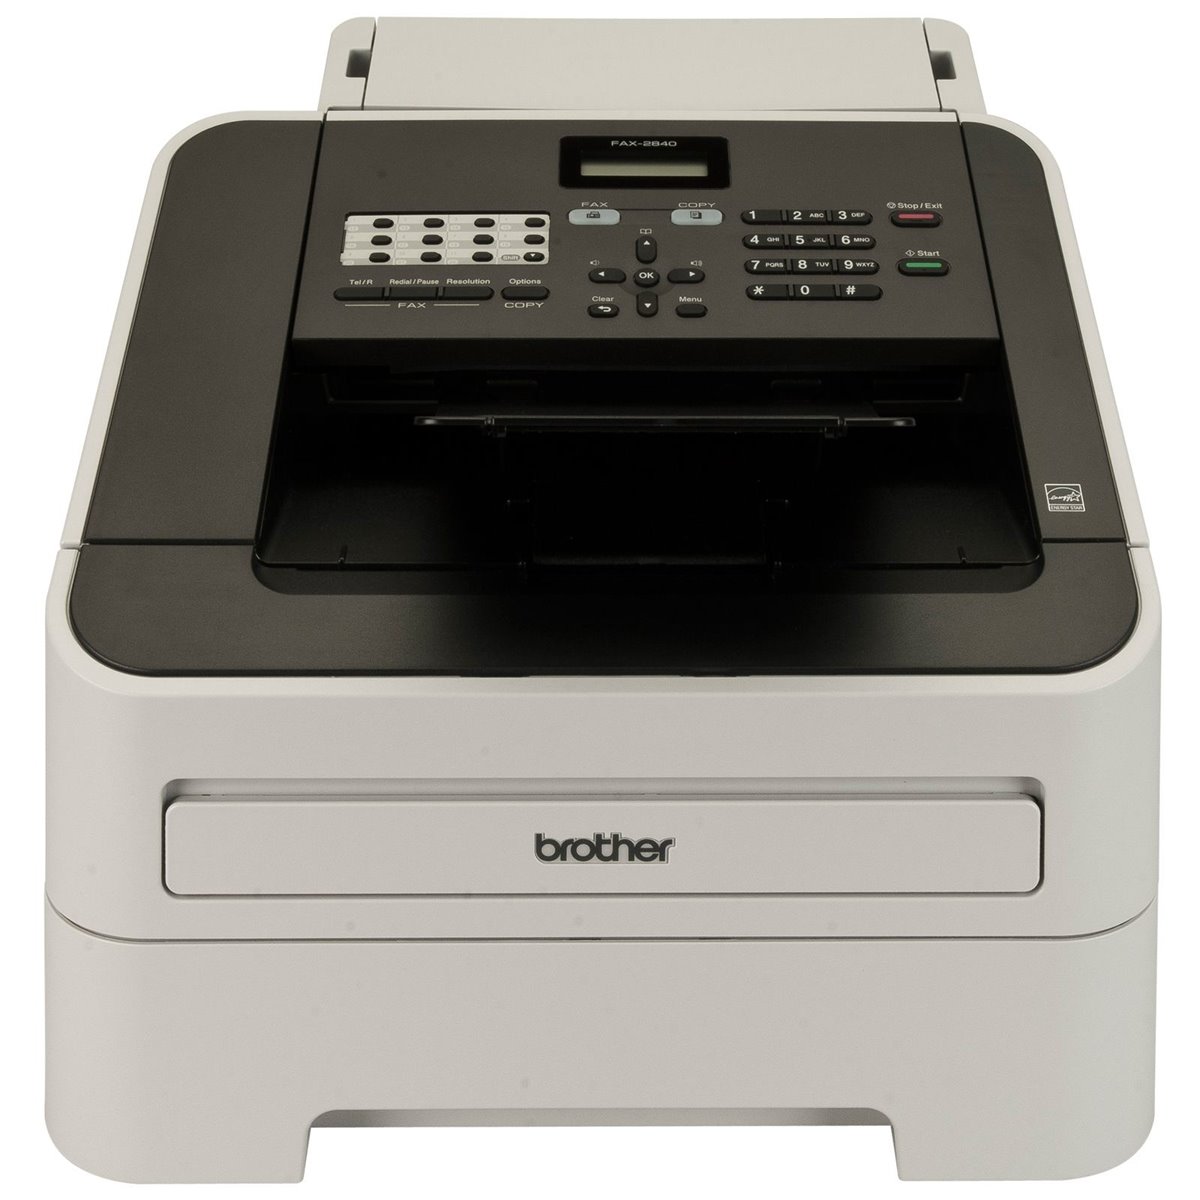 Brother fax-2840 laser fax MONOCHROME - Fax - Laser/Led